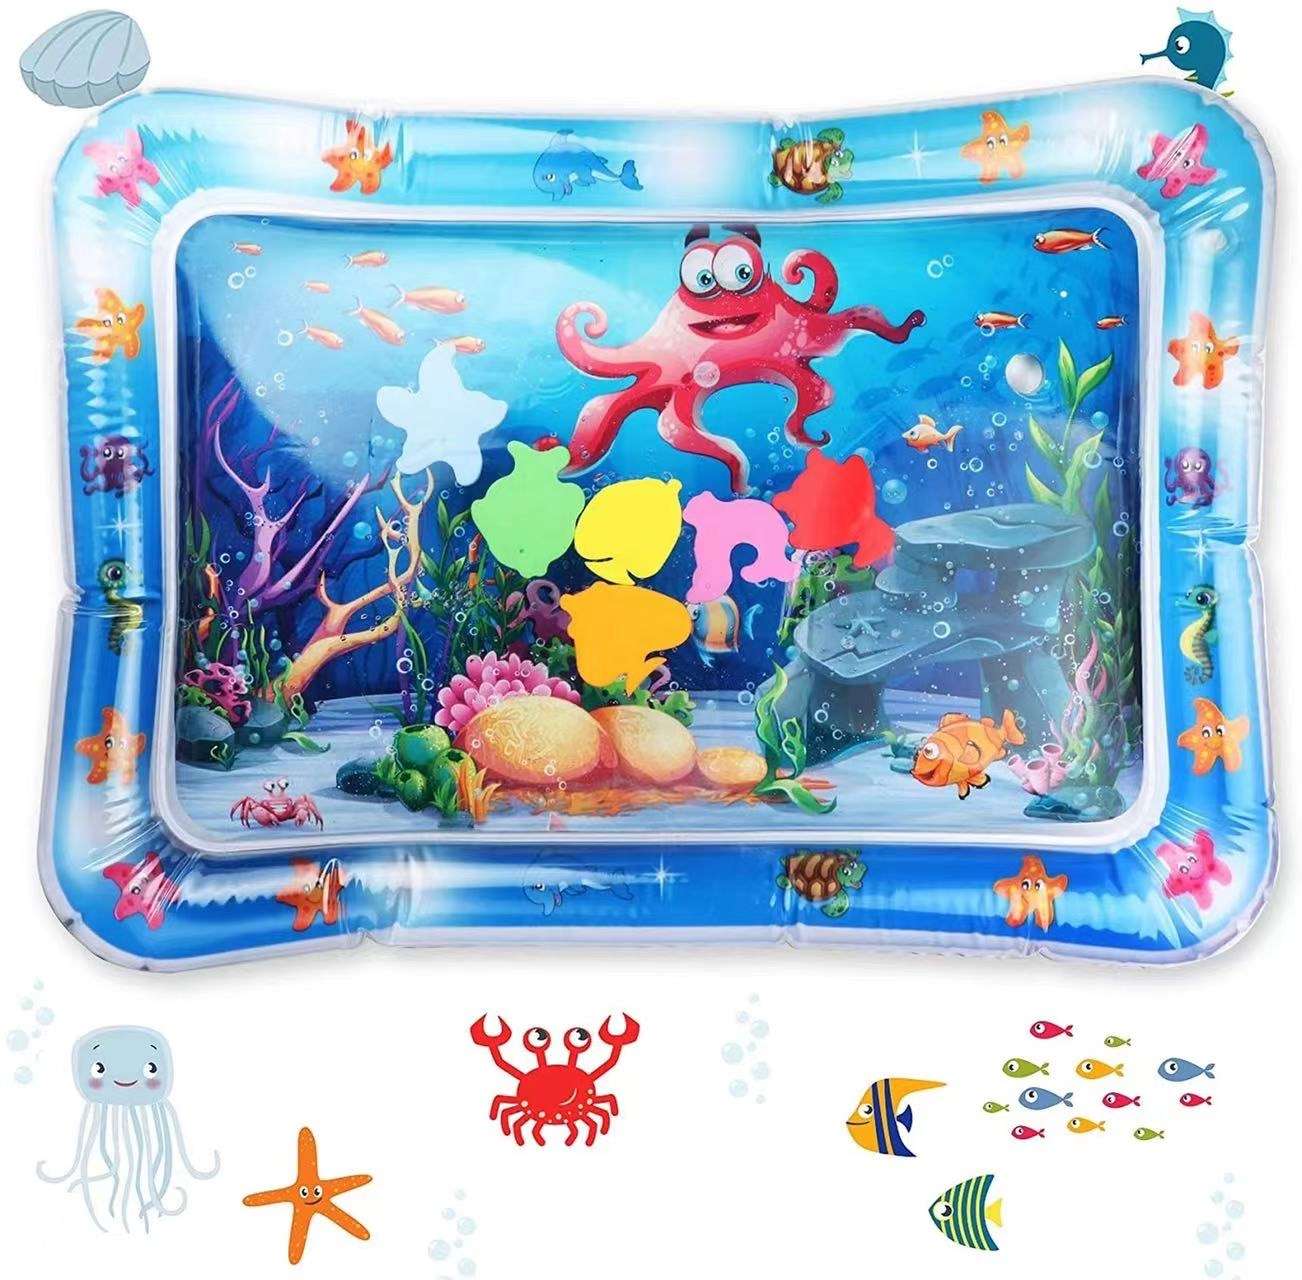 misuki Baby Water Mat Tummy Time Inflatable Water Play Mat for Babies Infants Toddlers Child Development Activity Center Babys Stimulation Growth 